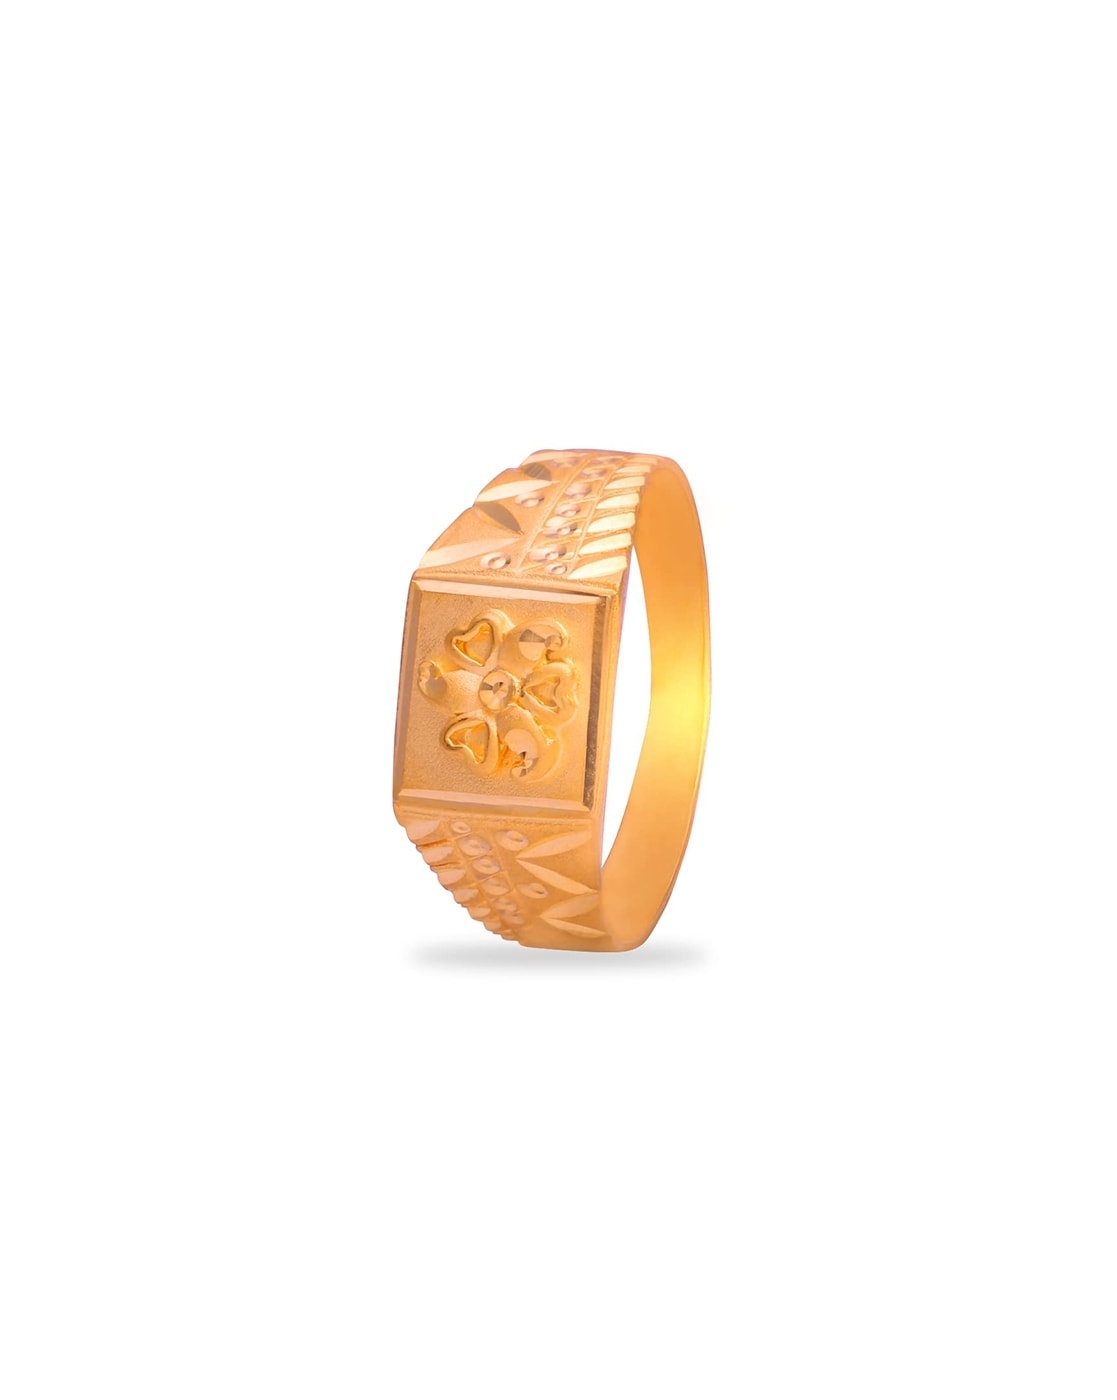 Buy WHP Jewellers 18KT (750) Yellow Gold Ring For Men_H-019-G at Amazon.in